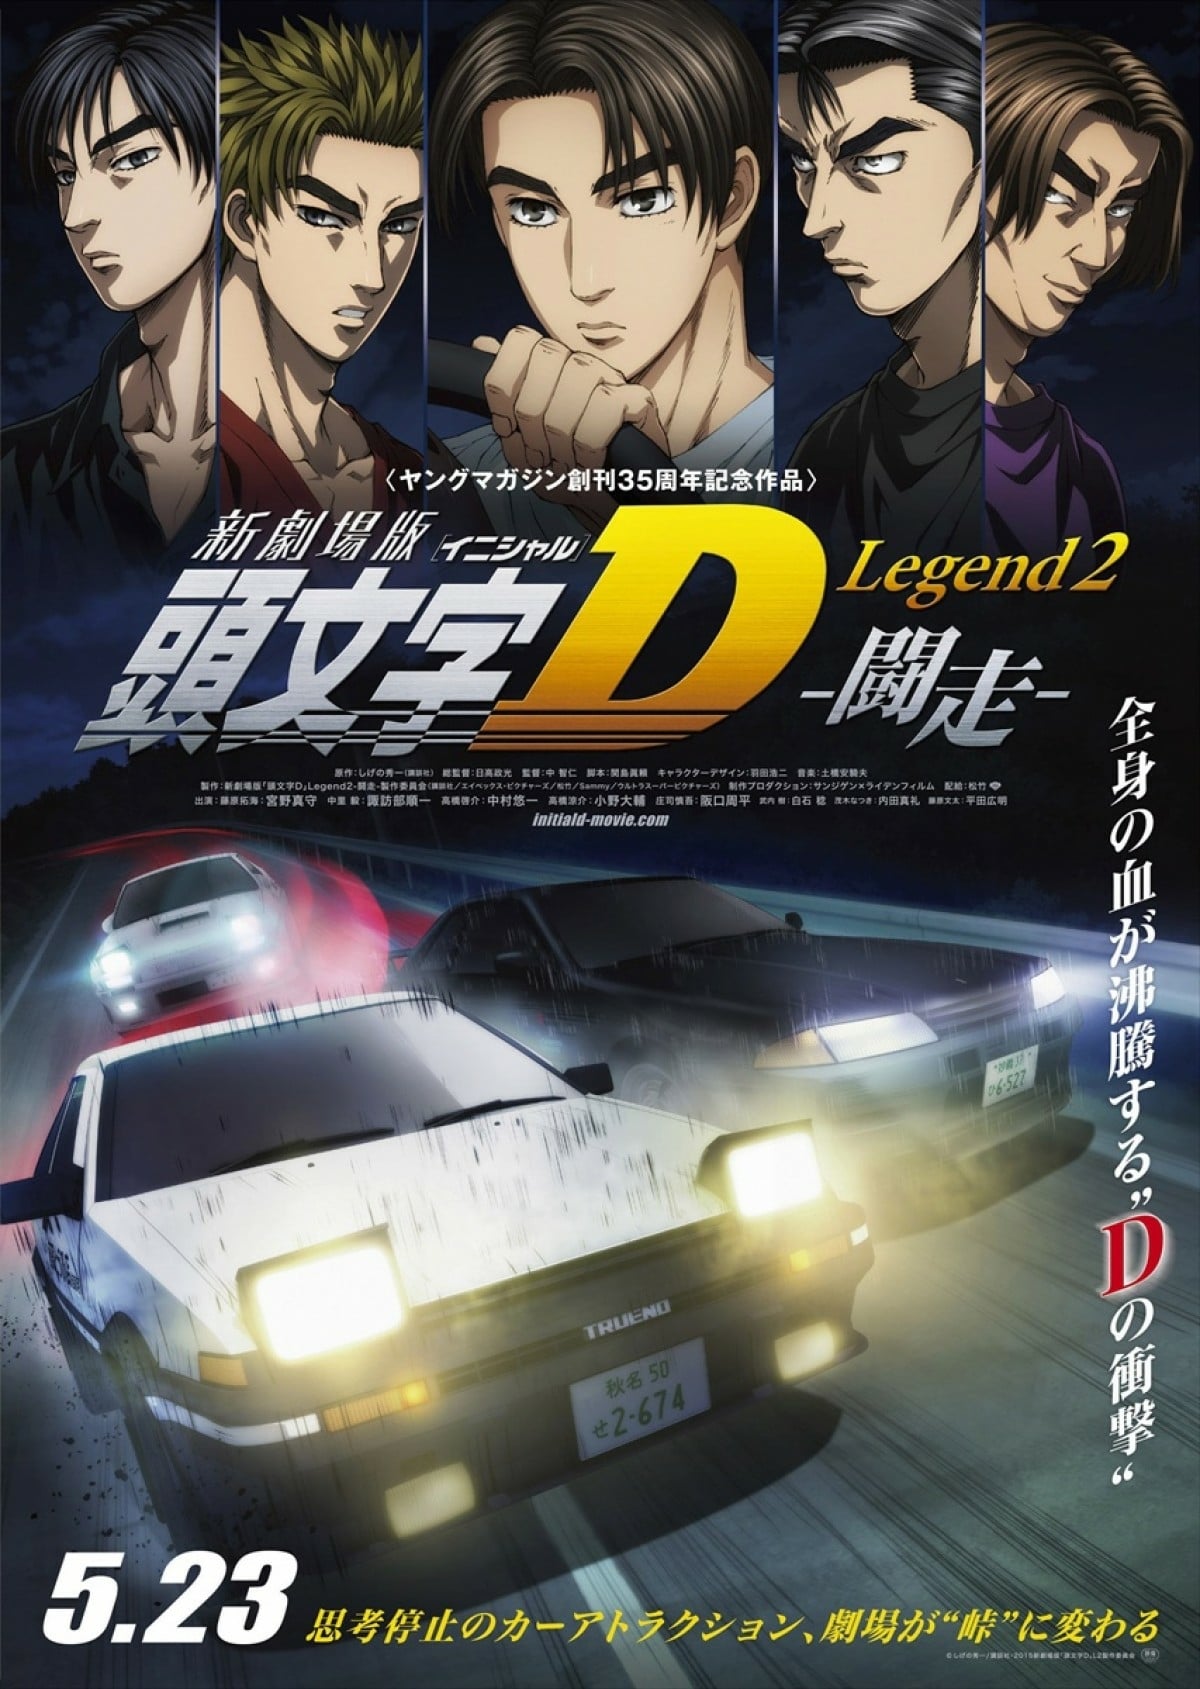 New Initial D the Movie – Legend 2: Racer